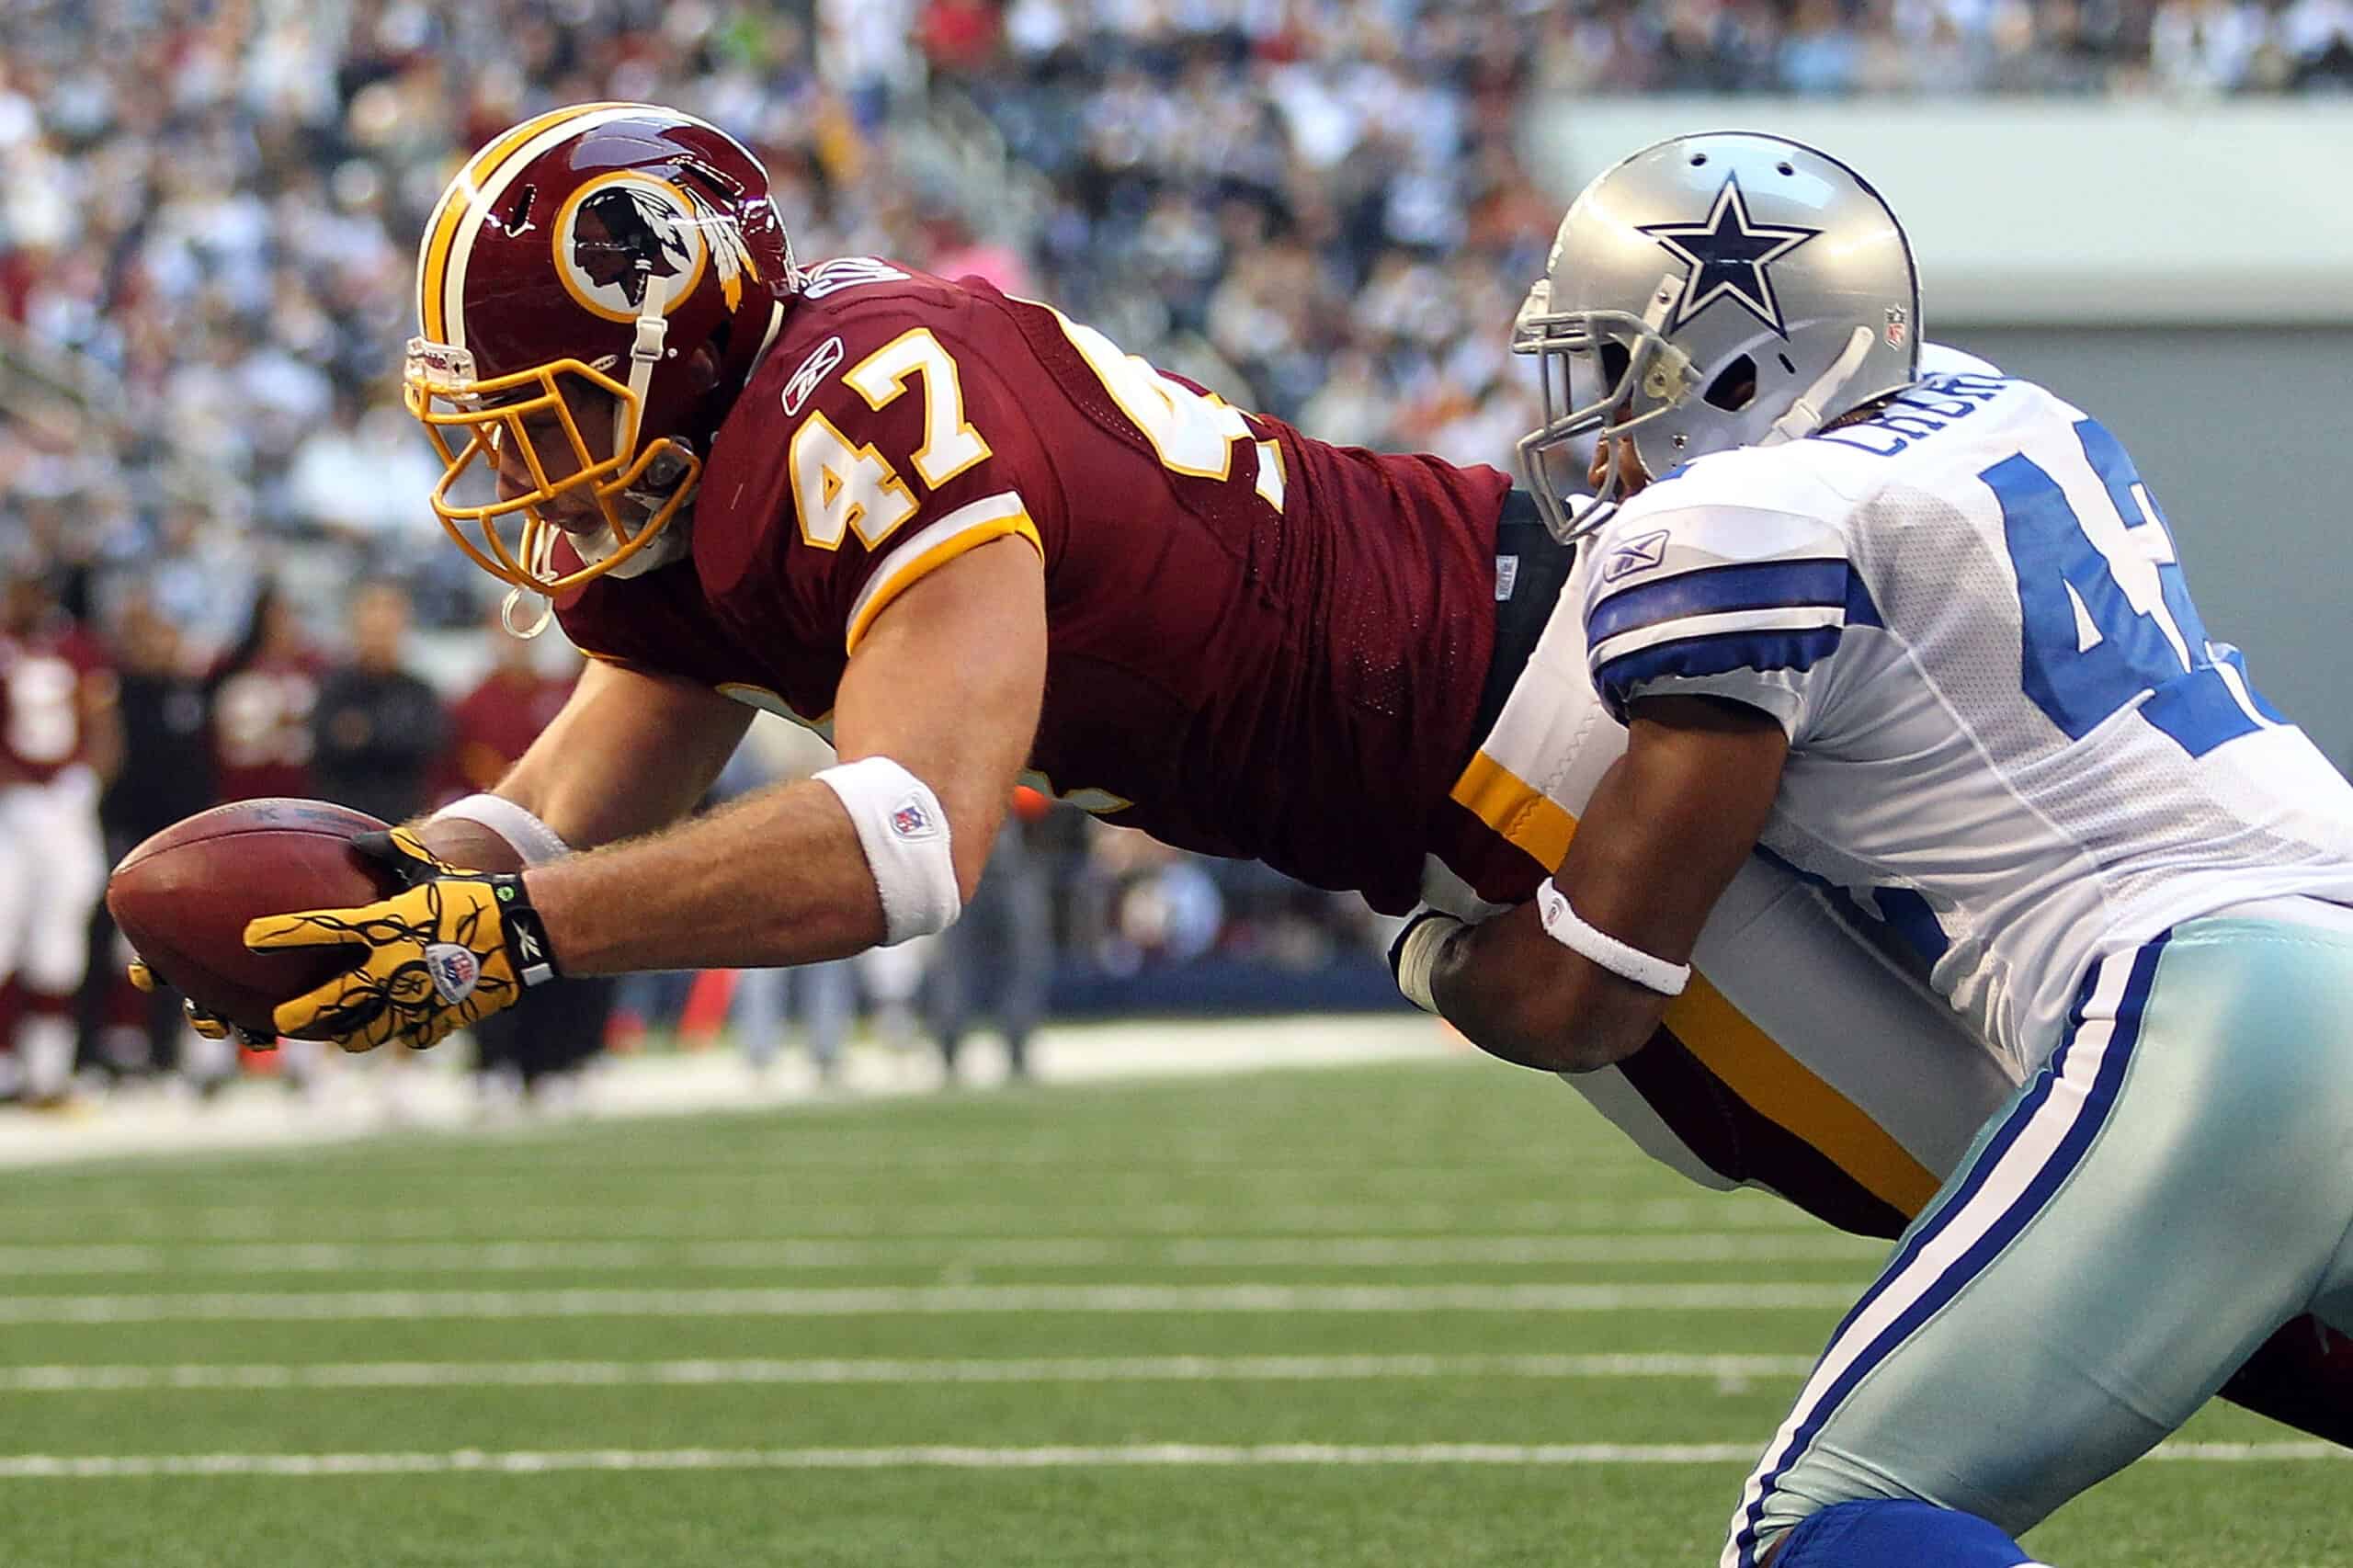 ARLINGTON, TX - DECEMBER 19: Tight end Chris Cooley #47 of the Washington Redskins dives on a two point conversion against Barry Church #42 of the Dallas Cowboys at Cowboys Stadium on December 19, 2010 in Arlington, Texas. (Photo by Ronald Martinez/Getty Images)